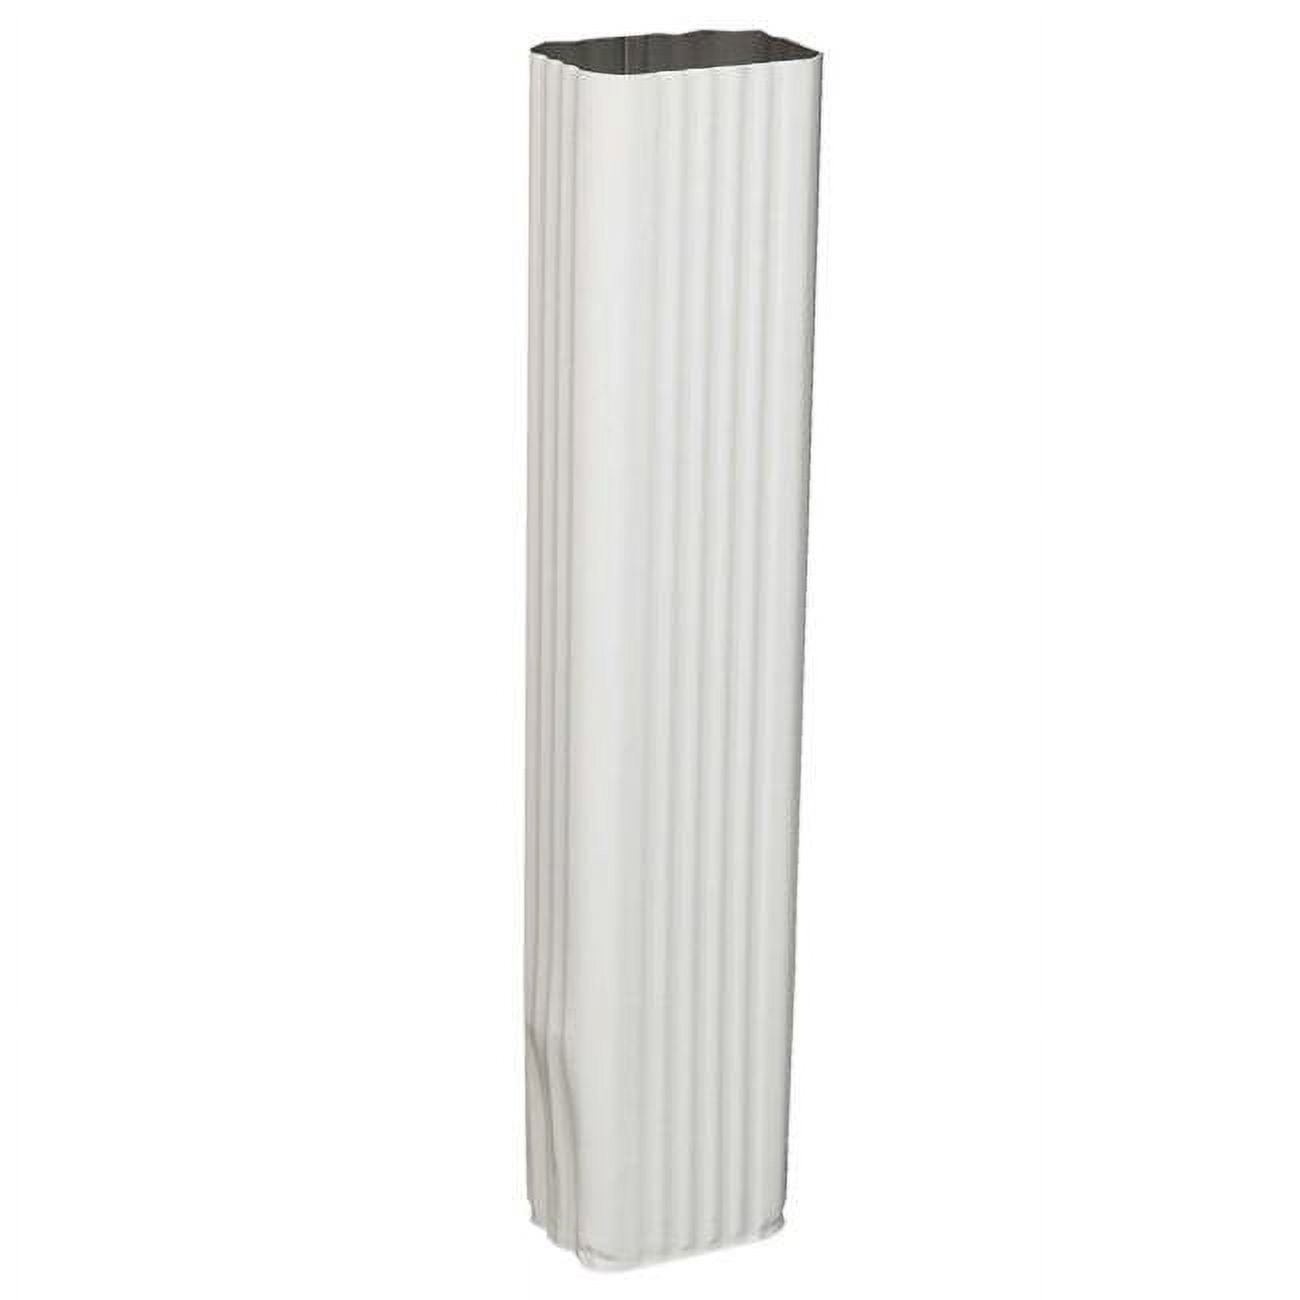 5757901 3 X 4.25 X 15 In. White Aluminum Downspout Extension